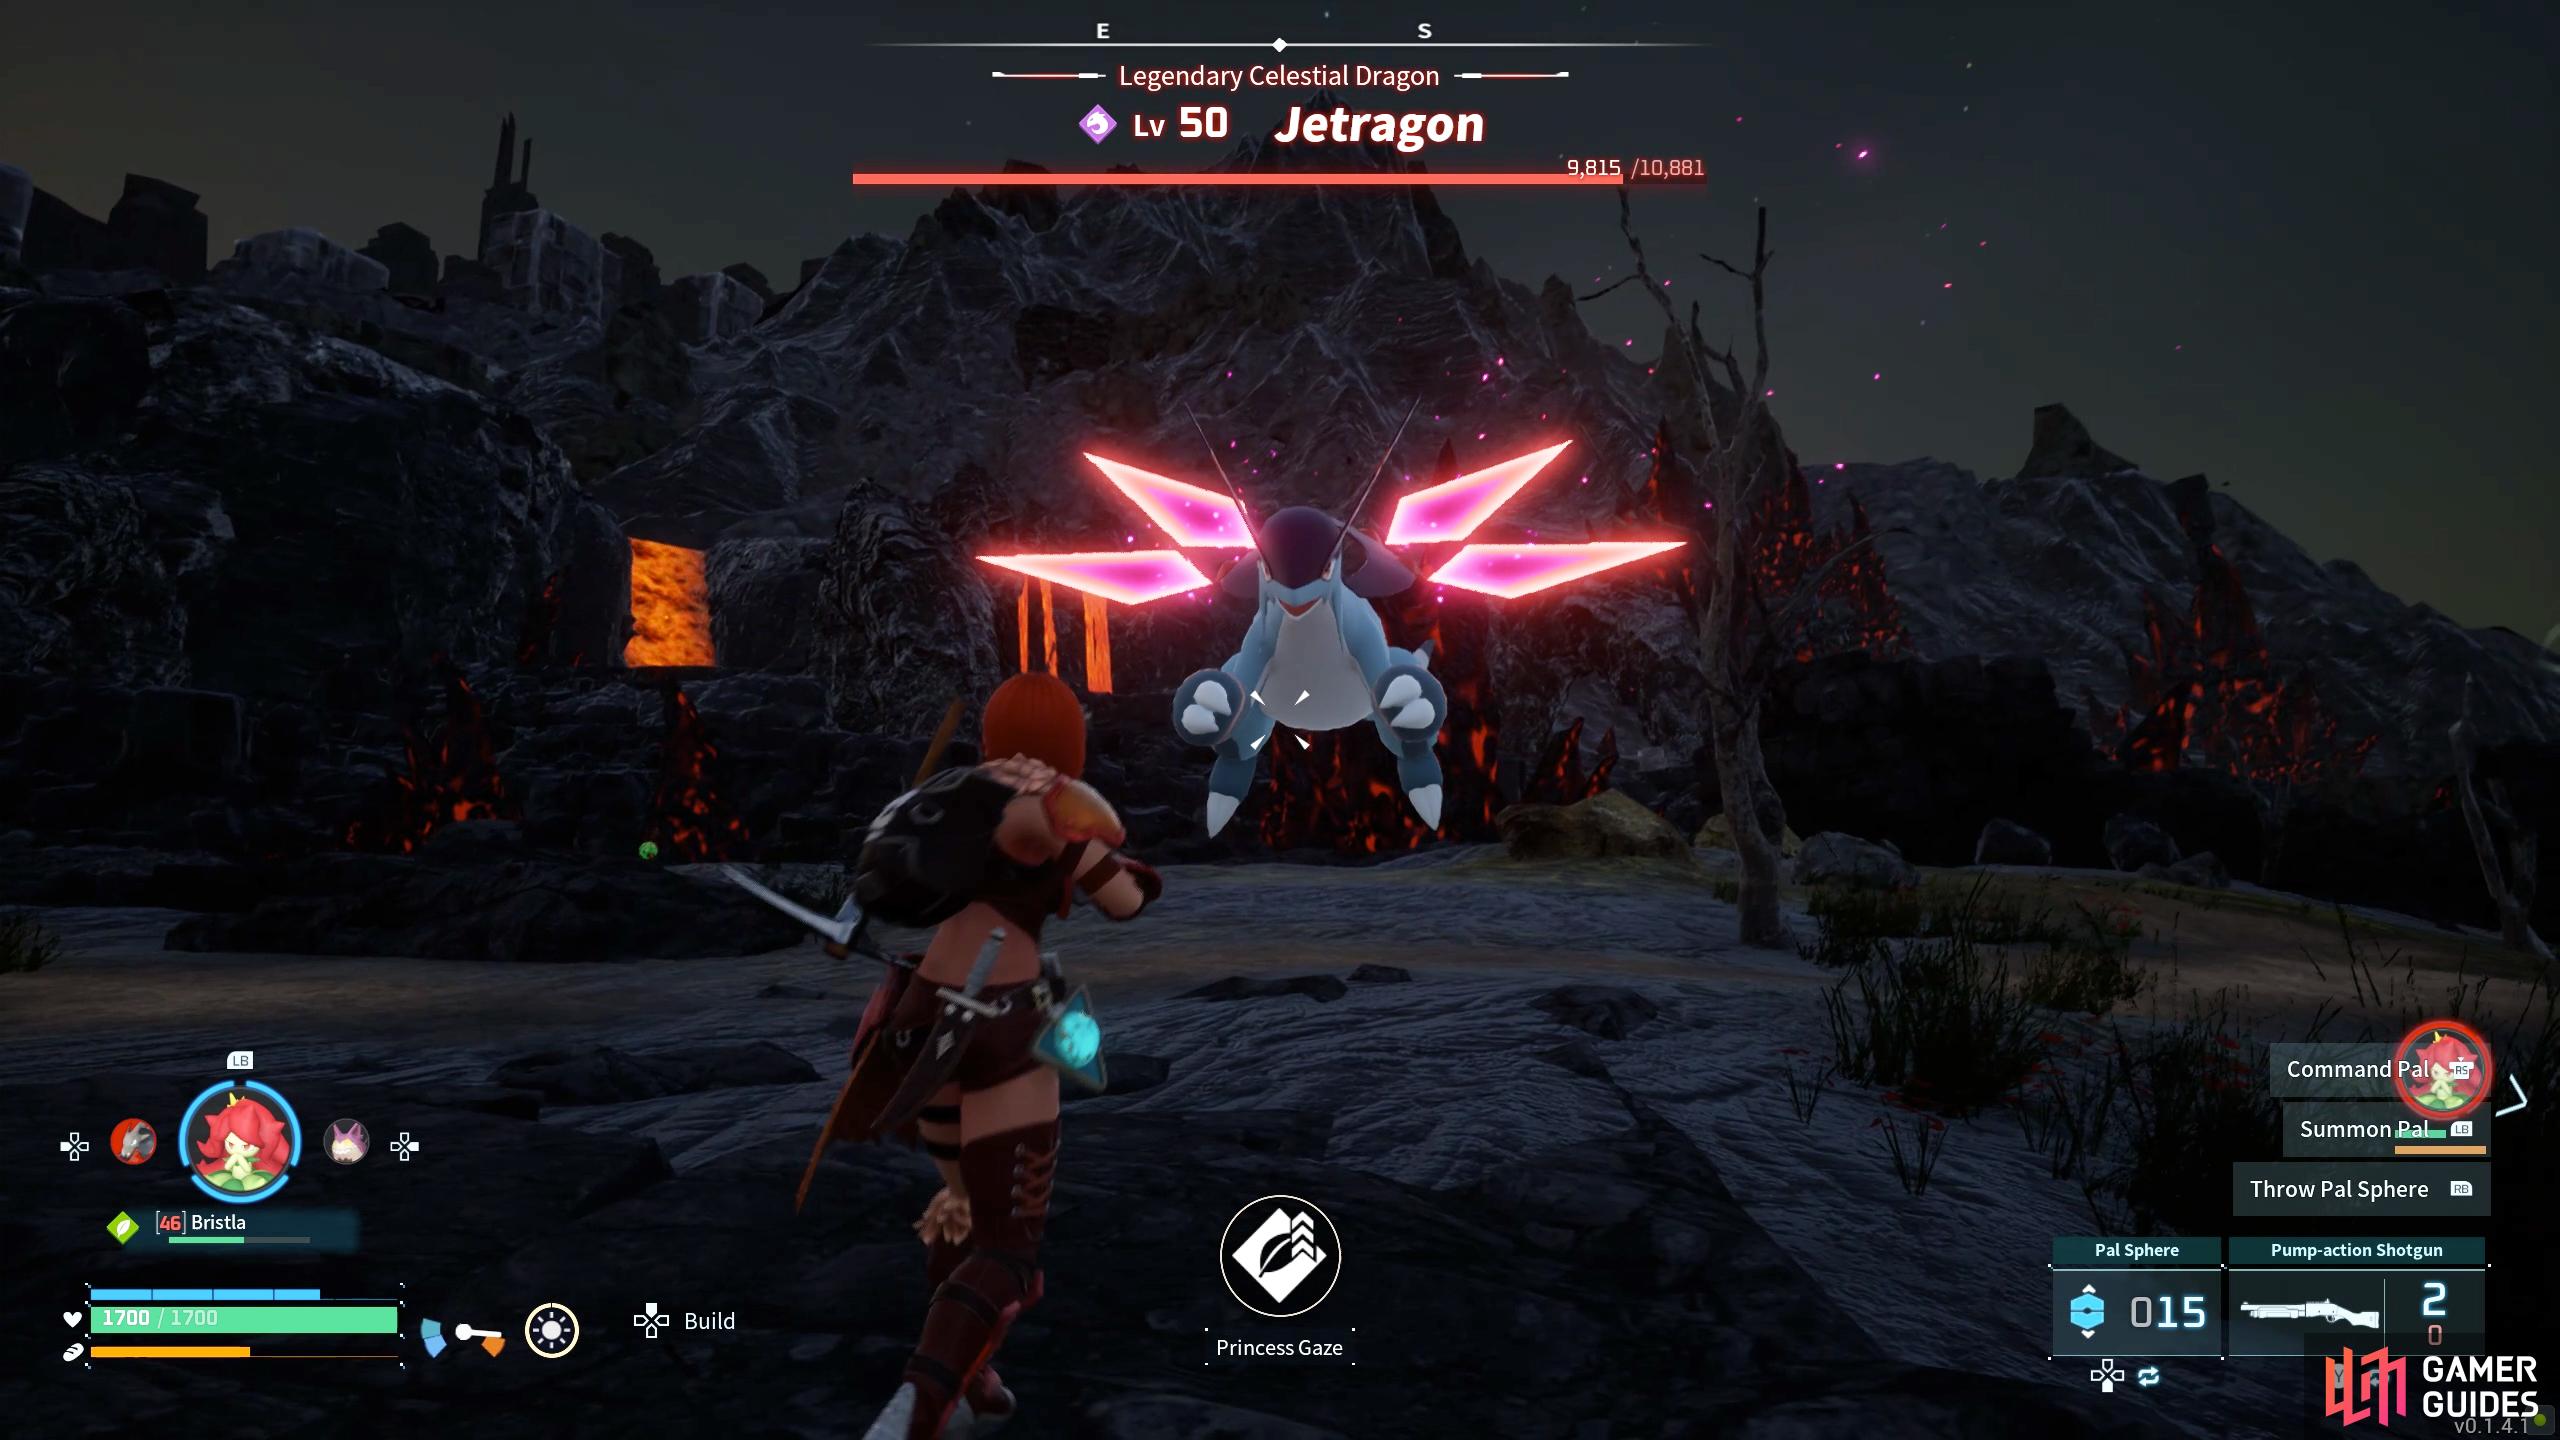 Jetragon can be found on Mount Obsidian, but make sure you come prepared!